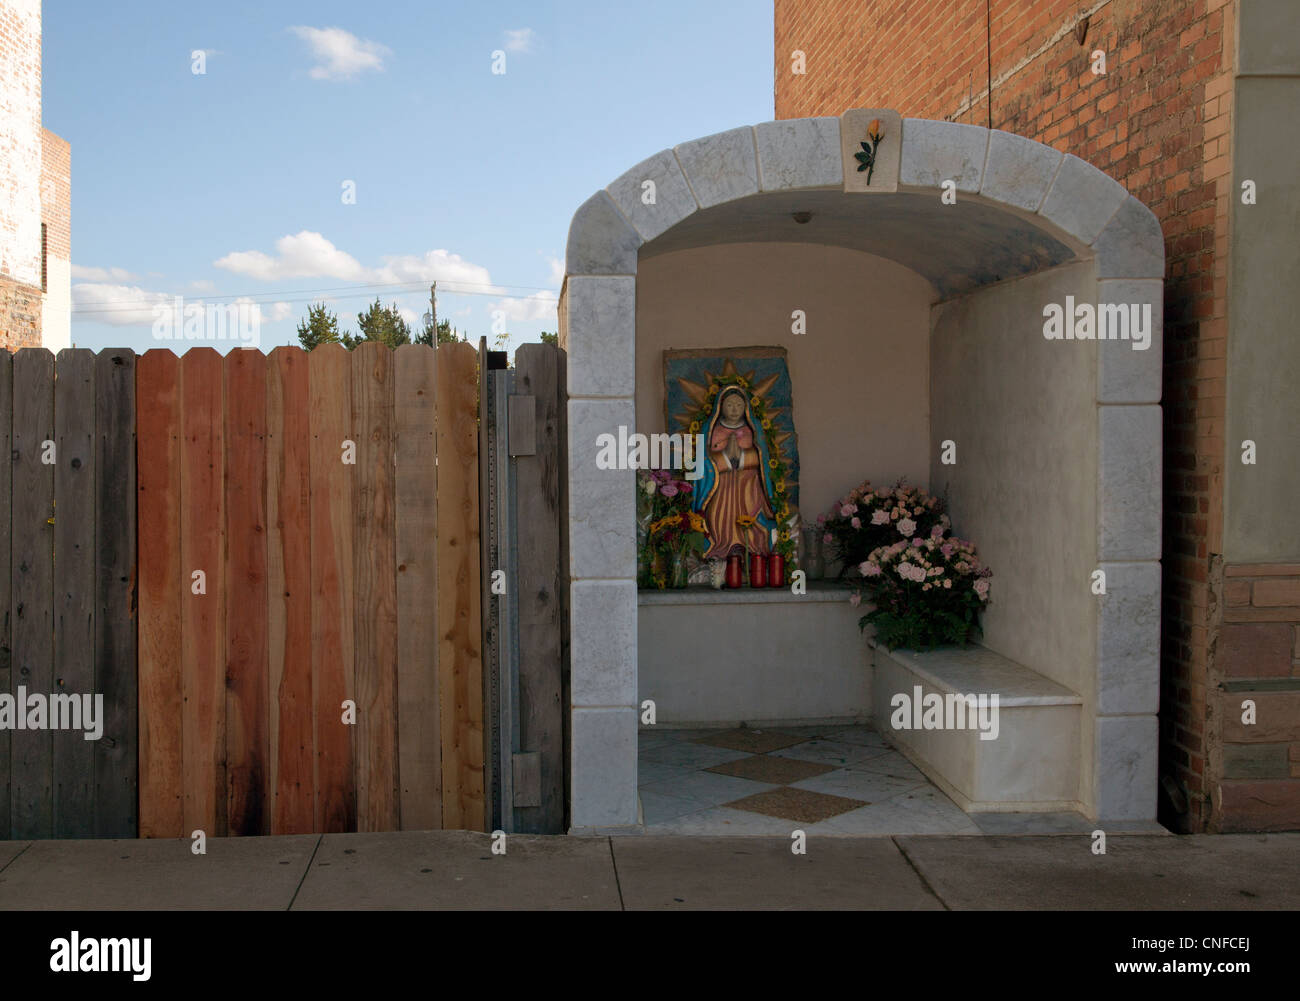 This shrine to Our Lady of Guadalupe is built on a city street by a private worshipper, yet open to the public. Stock Photo